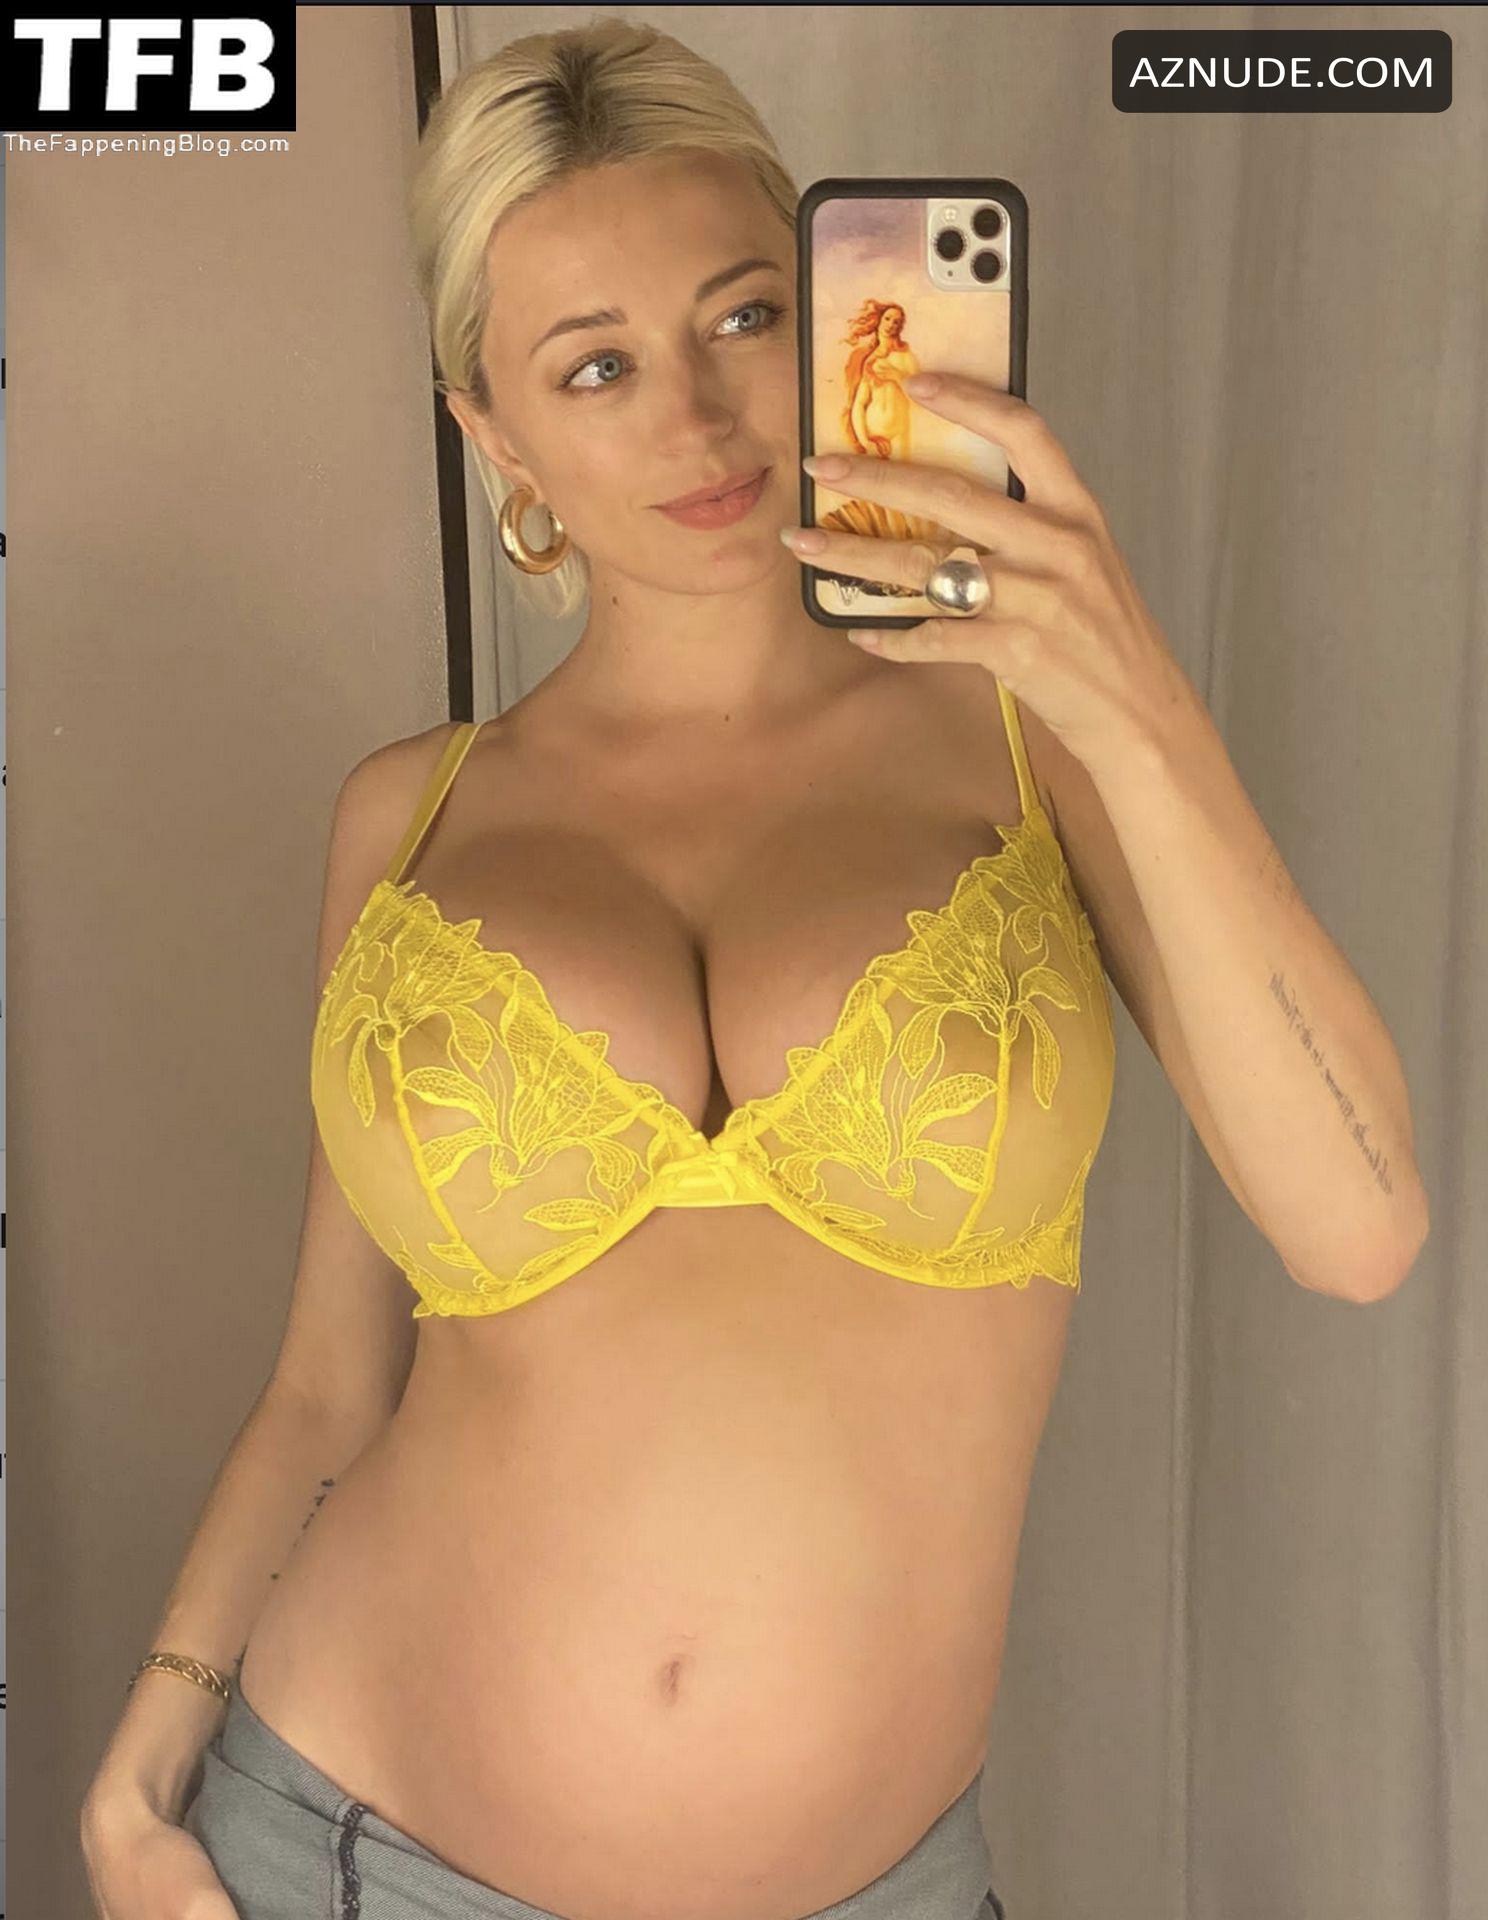 Caroline Vreeland Sexy Poses Showing Off Her Huge Pregnant Boobs In A Lace Bra In A Social Media 5669